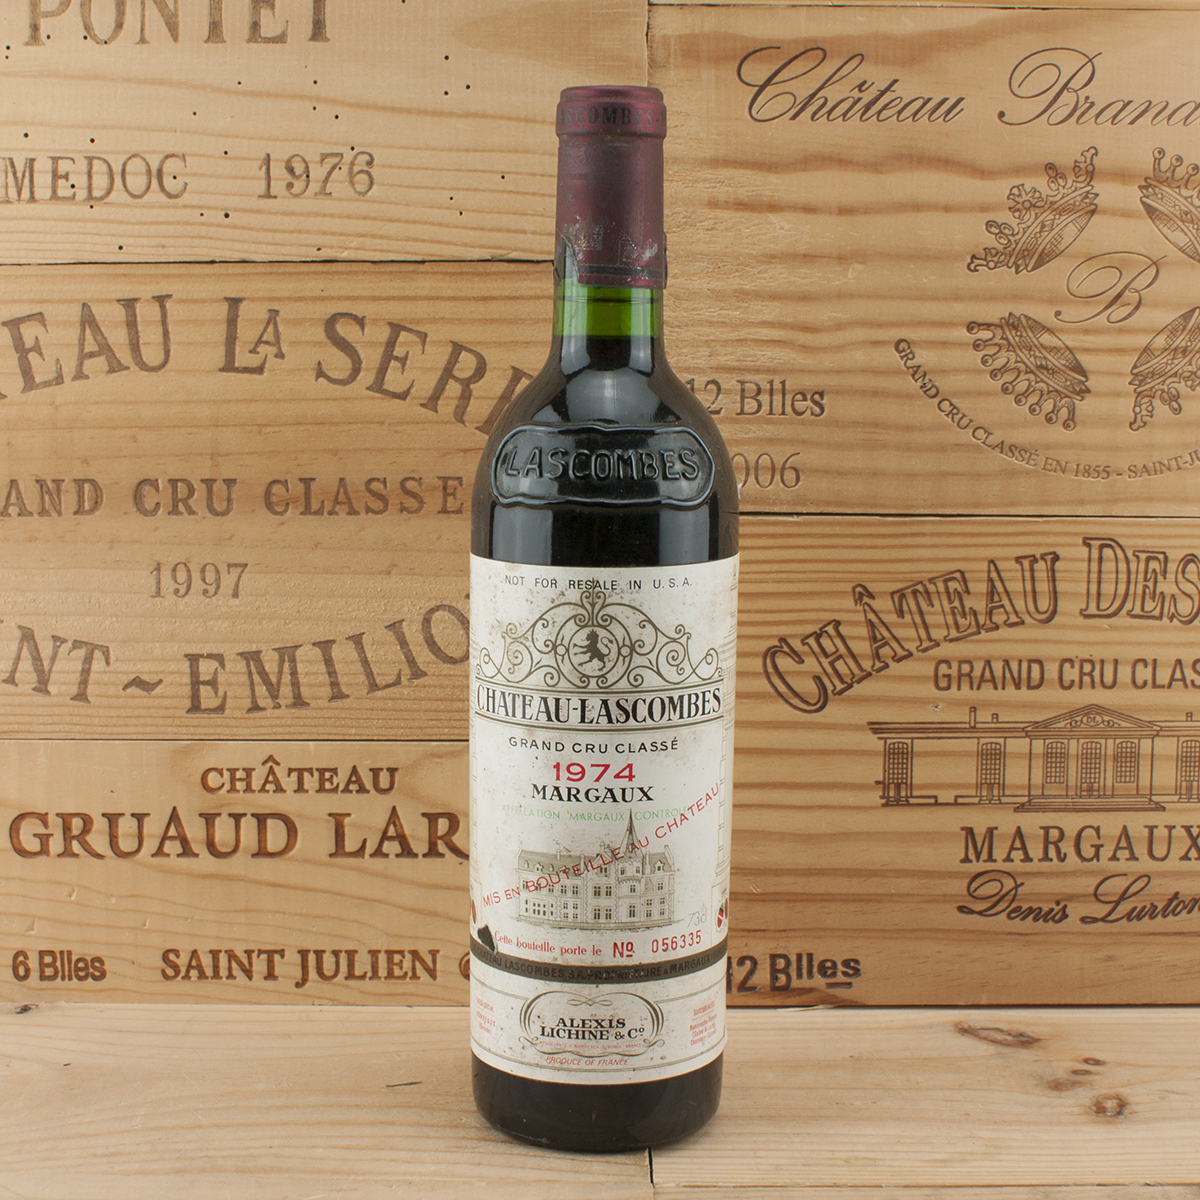 1974 Chateau Lascombes